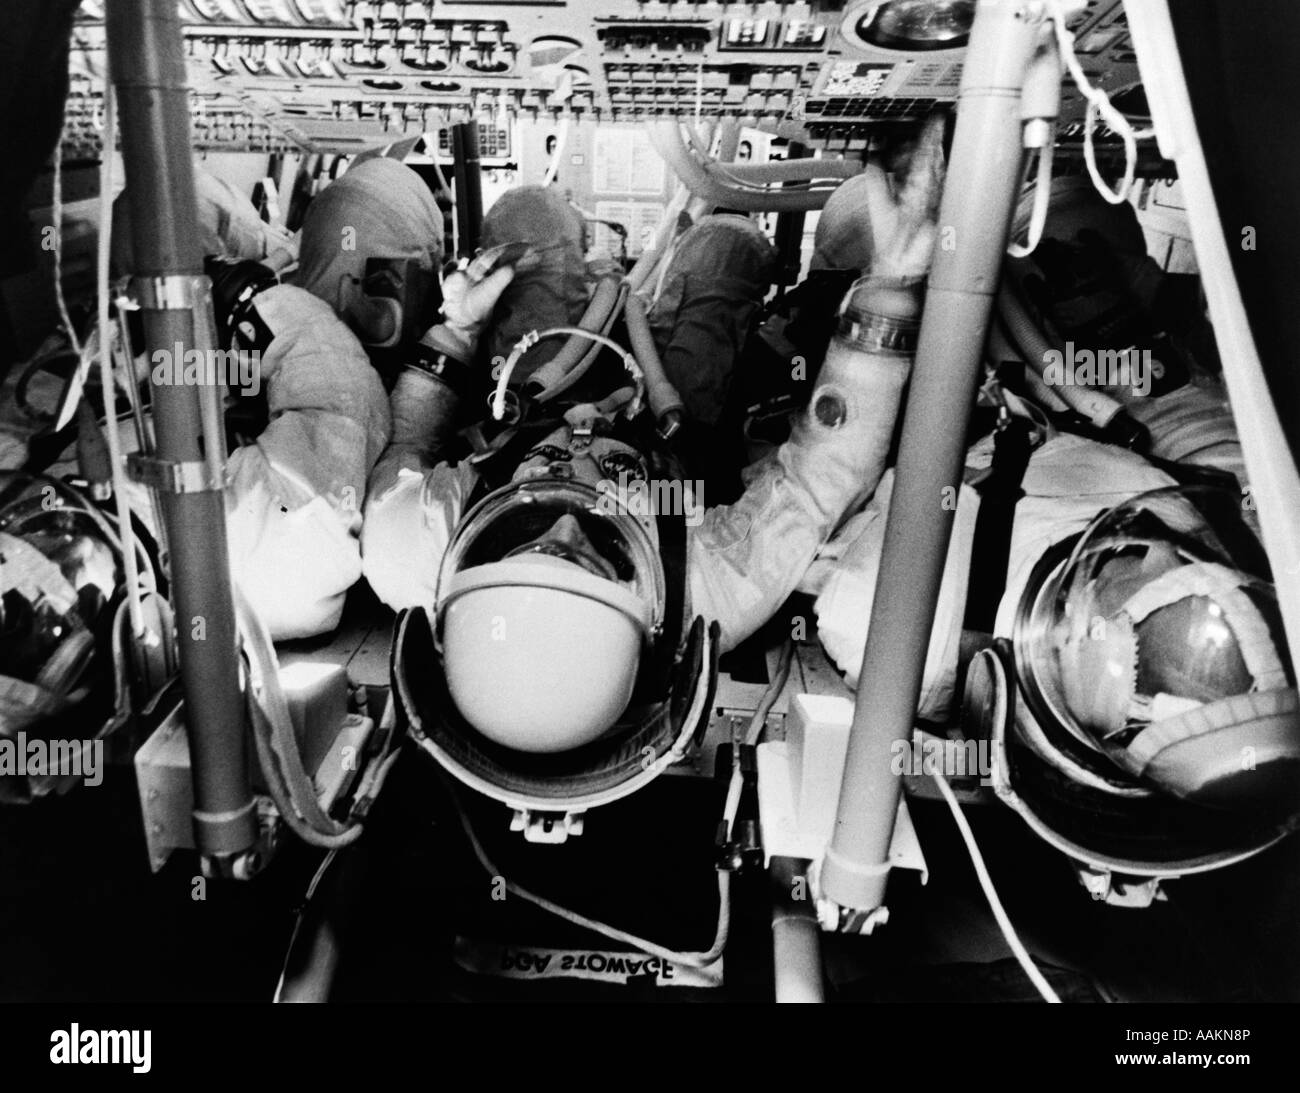 1960s OVERHEAD OF 3 BACK-UP CREW MEMBERS FOR FIRST MANNED APOLLO MISSION Stock Photo